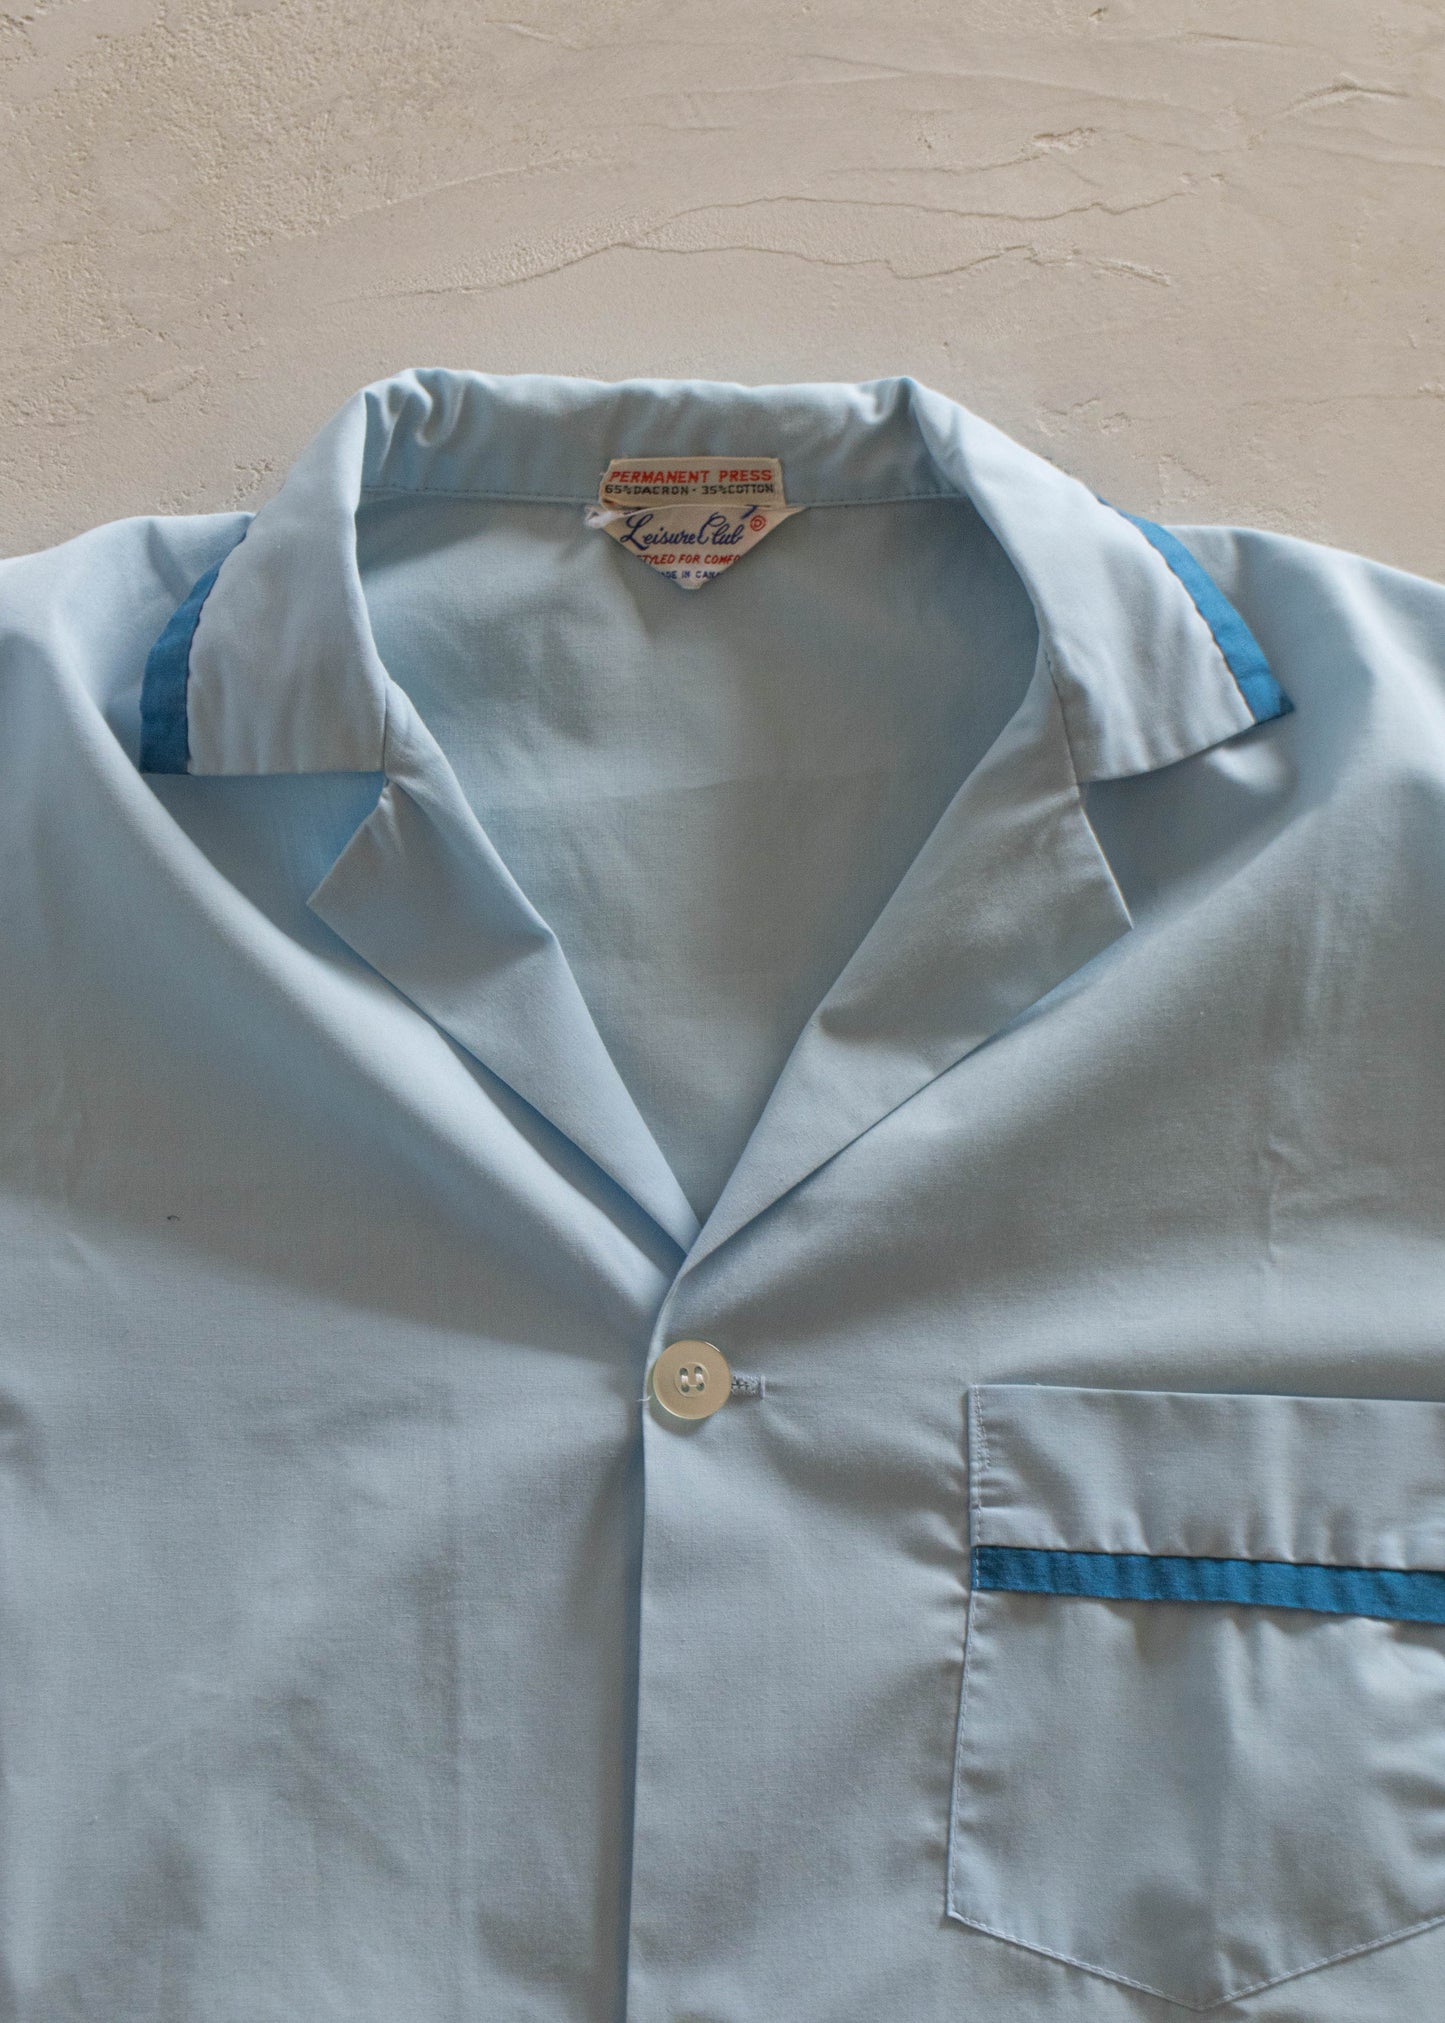 1960s Leisure Club Solid Blue Long Sleeve Button Up Pajama Shirt Size 2XL/3XL